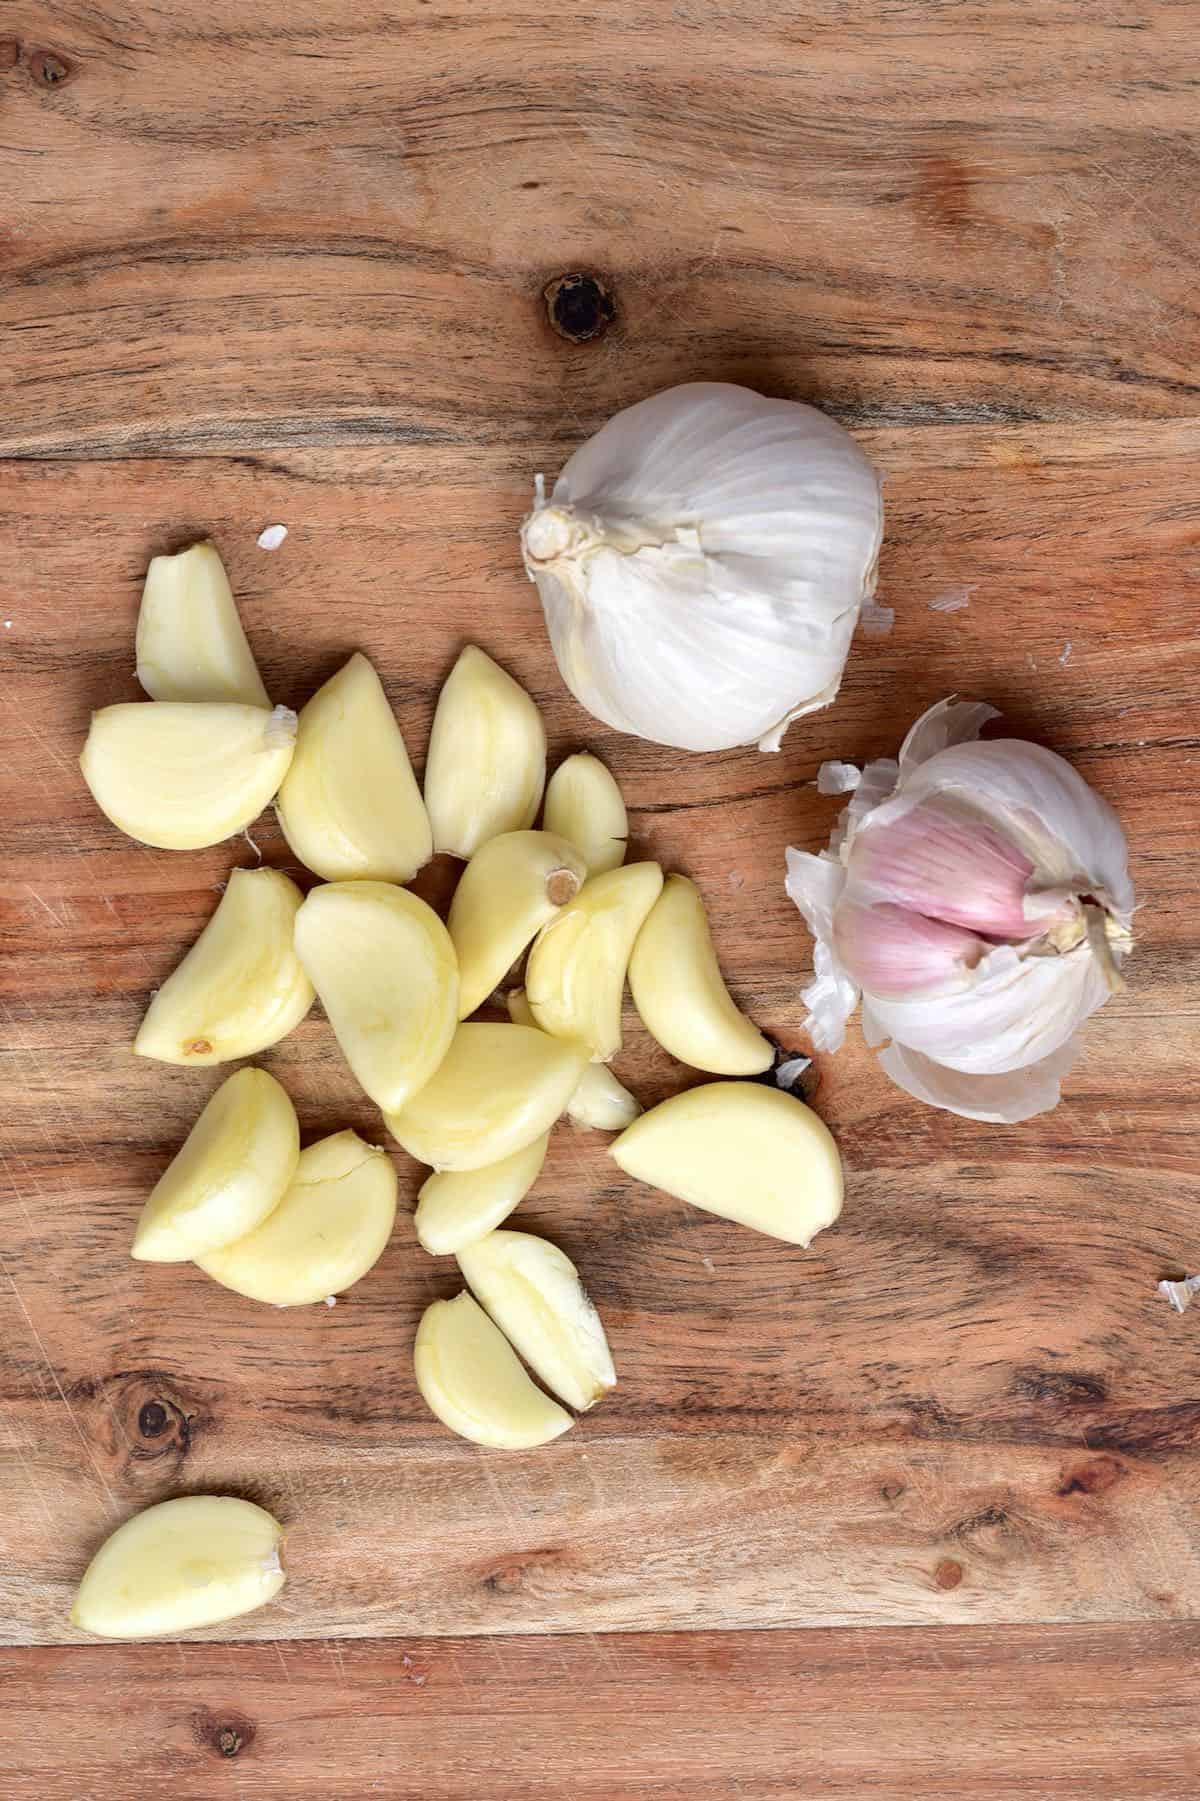 Some peeled garlic cloves and two garlic heads on a wooden board